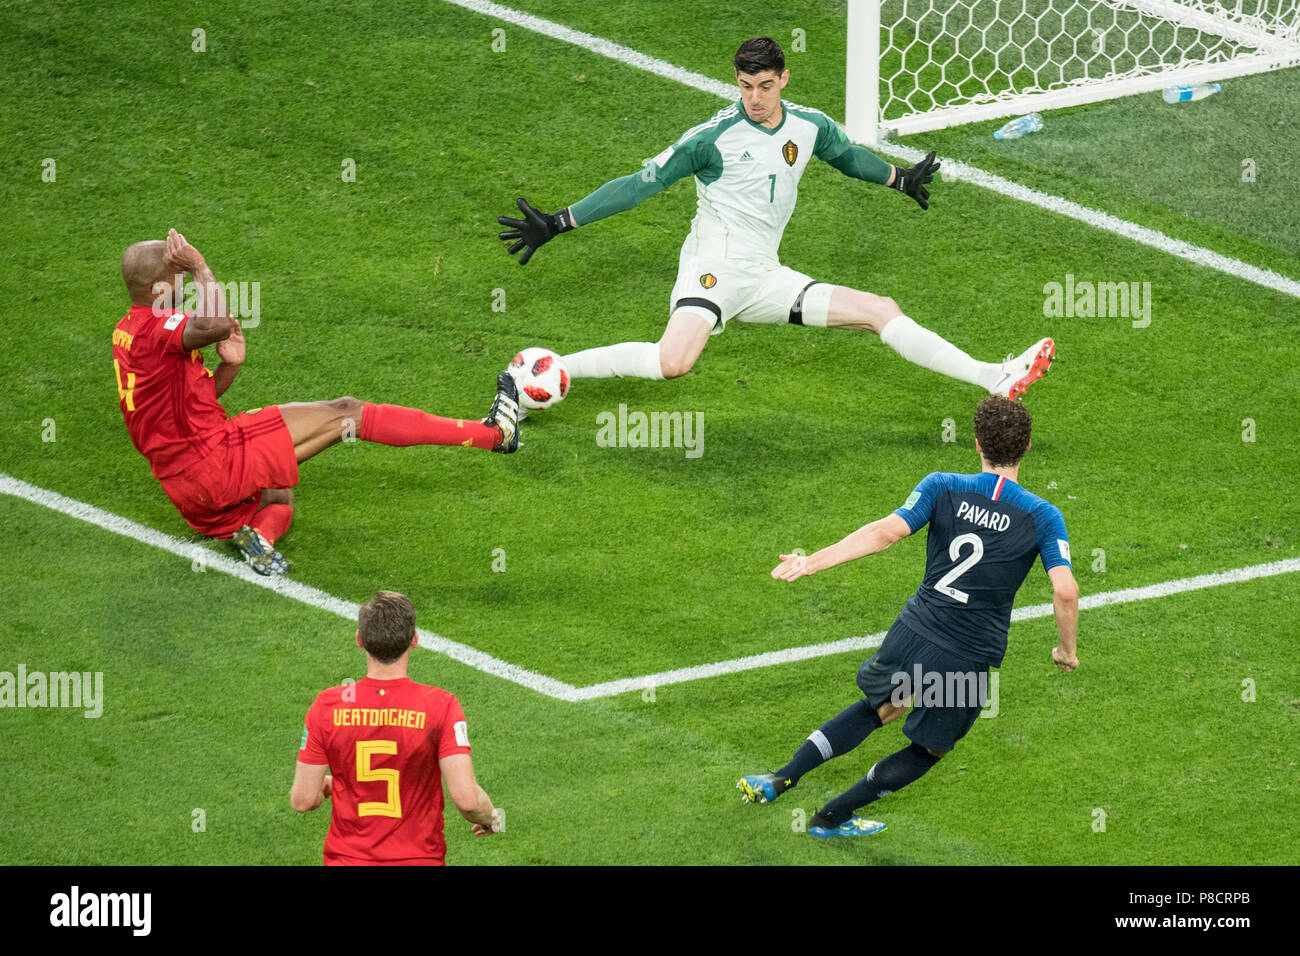 St. Petersburg, Russland. 11th July, 2018. Benjamin PAVARD (mi., FRA) versus goalkeeper Thibaut COURTOIS (right, BEL) and Vincent KOMPANY (BEL), action, fight for the ball, shot, goal-shot, France (FRA) - Belgium (BEL) 1: 0, semi-final, Game 61, on 10.07.2018 in St.Petersburg; Football World Cup 2018 in Russia from 14.06. - 15.07.2018. © | usage worldwide Credit: dpa/Alamy Live News Stock Photo